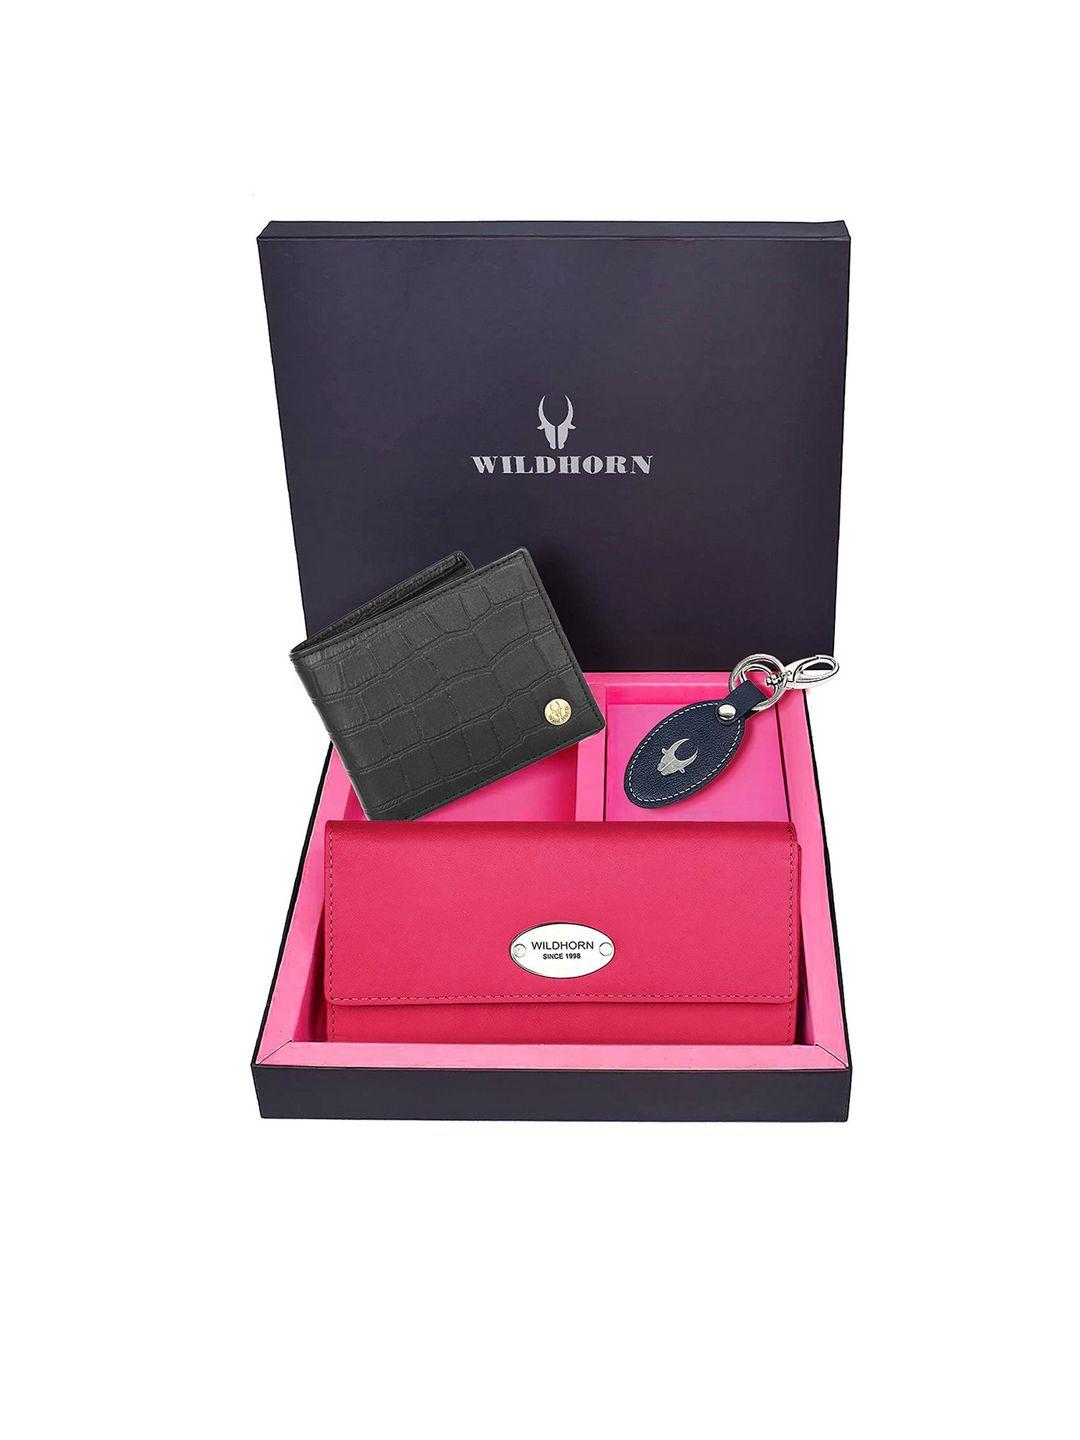 wildhorn unisex pink & black solid  leather accessory gift set